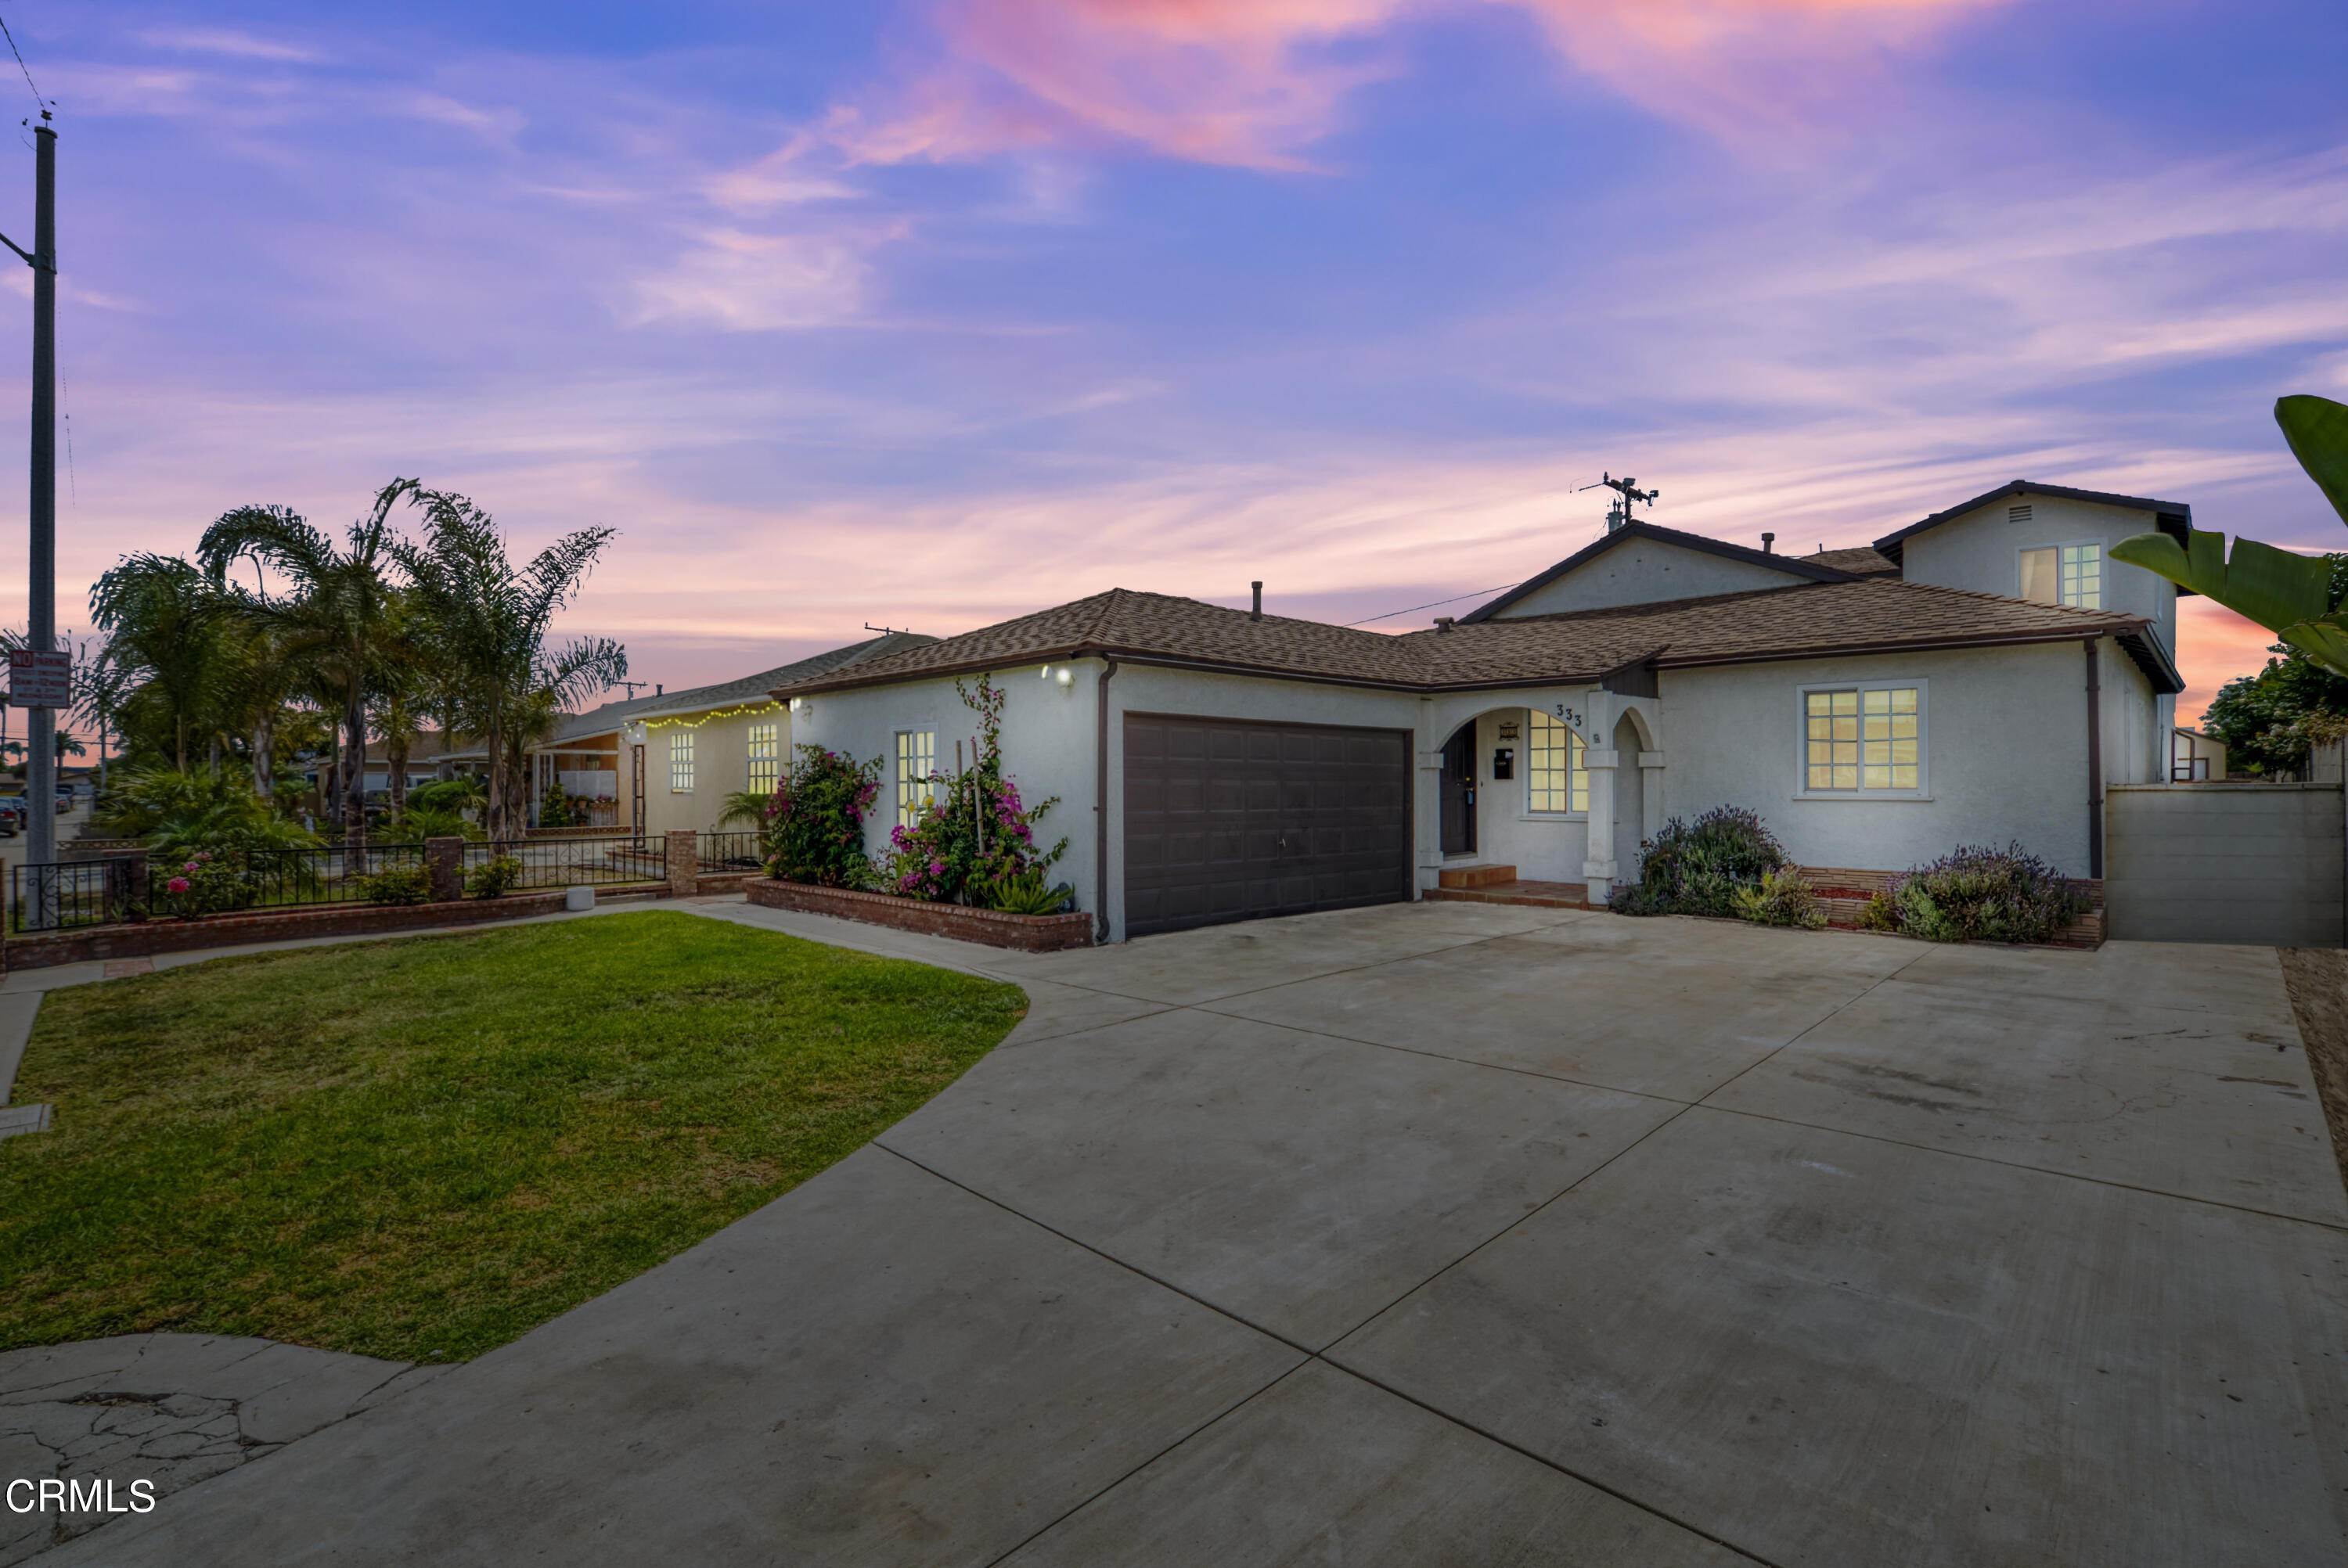 39. Single Family Homes for Sale at 333 North k Street Oxnard, California 93030 United States